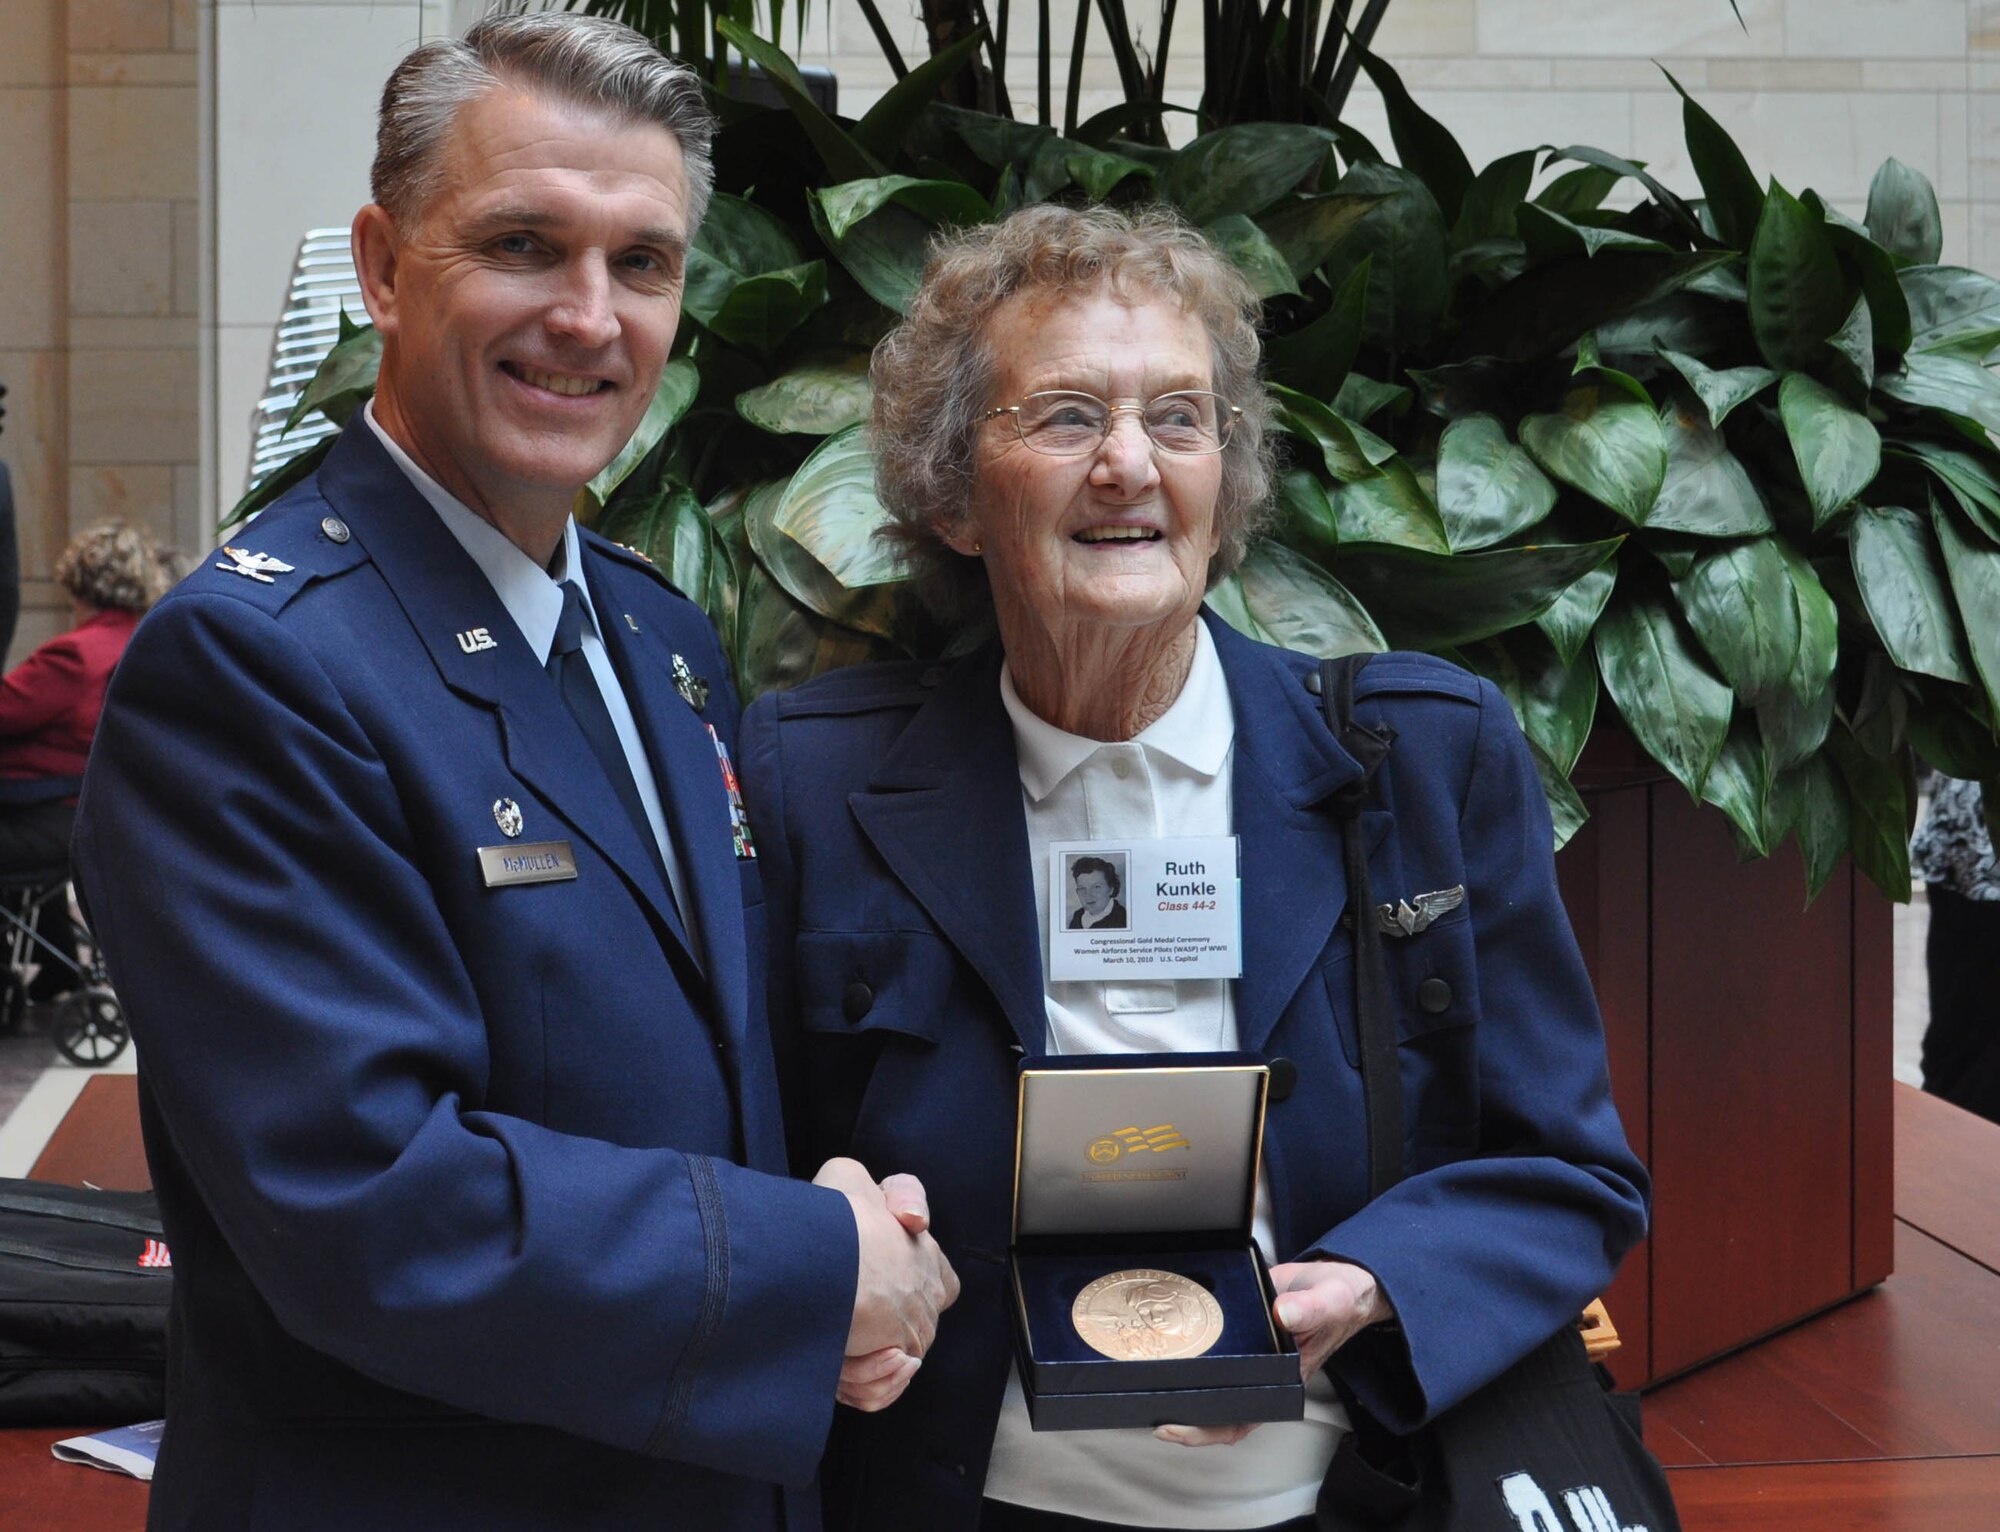 JOINT BASE MCGUIRE-DIX-LAKEHURST, N.J. - Col. Giordano B. McMullen, commander of the Reserve wing here, congratulates Ruth Kunkle for her military service performed during World War II. Mrs. Kunkle is one of about 180 Women AirForce Service Pilots who made the trip to the nation's capitol to receive recognition and thanks for their service performed during World War II. With less than 300 WASPs alive today, those present at the March 10 WASP Gold Medal Ceremony on Capitol Hill, Washington, D.C. recevied a Congressional Medal of Honor. (U.S. Air Force photo/Capt. Kelly A. Smyth)